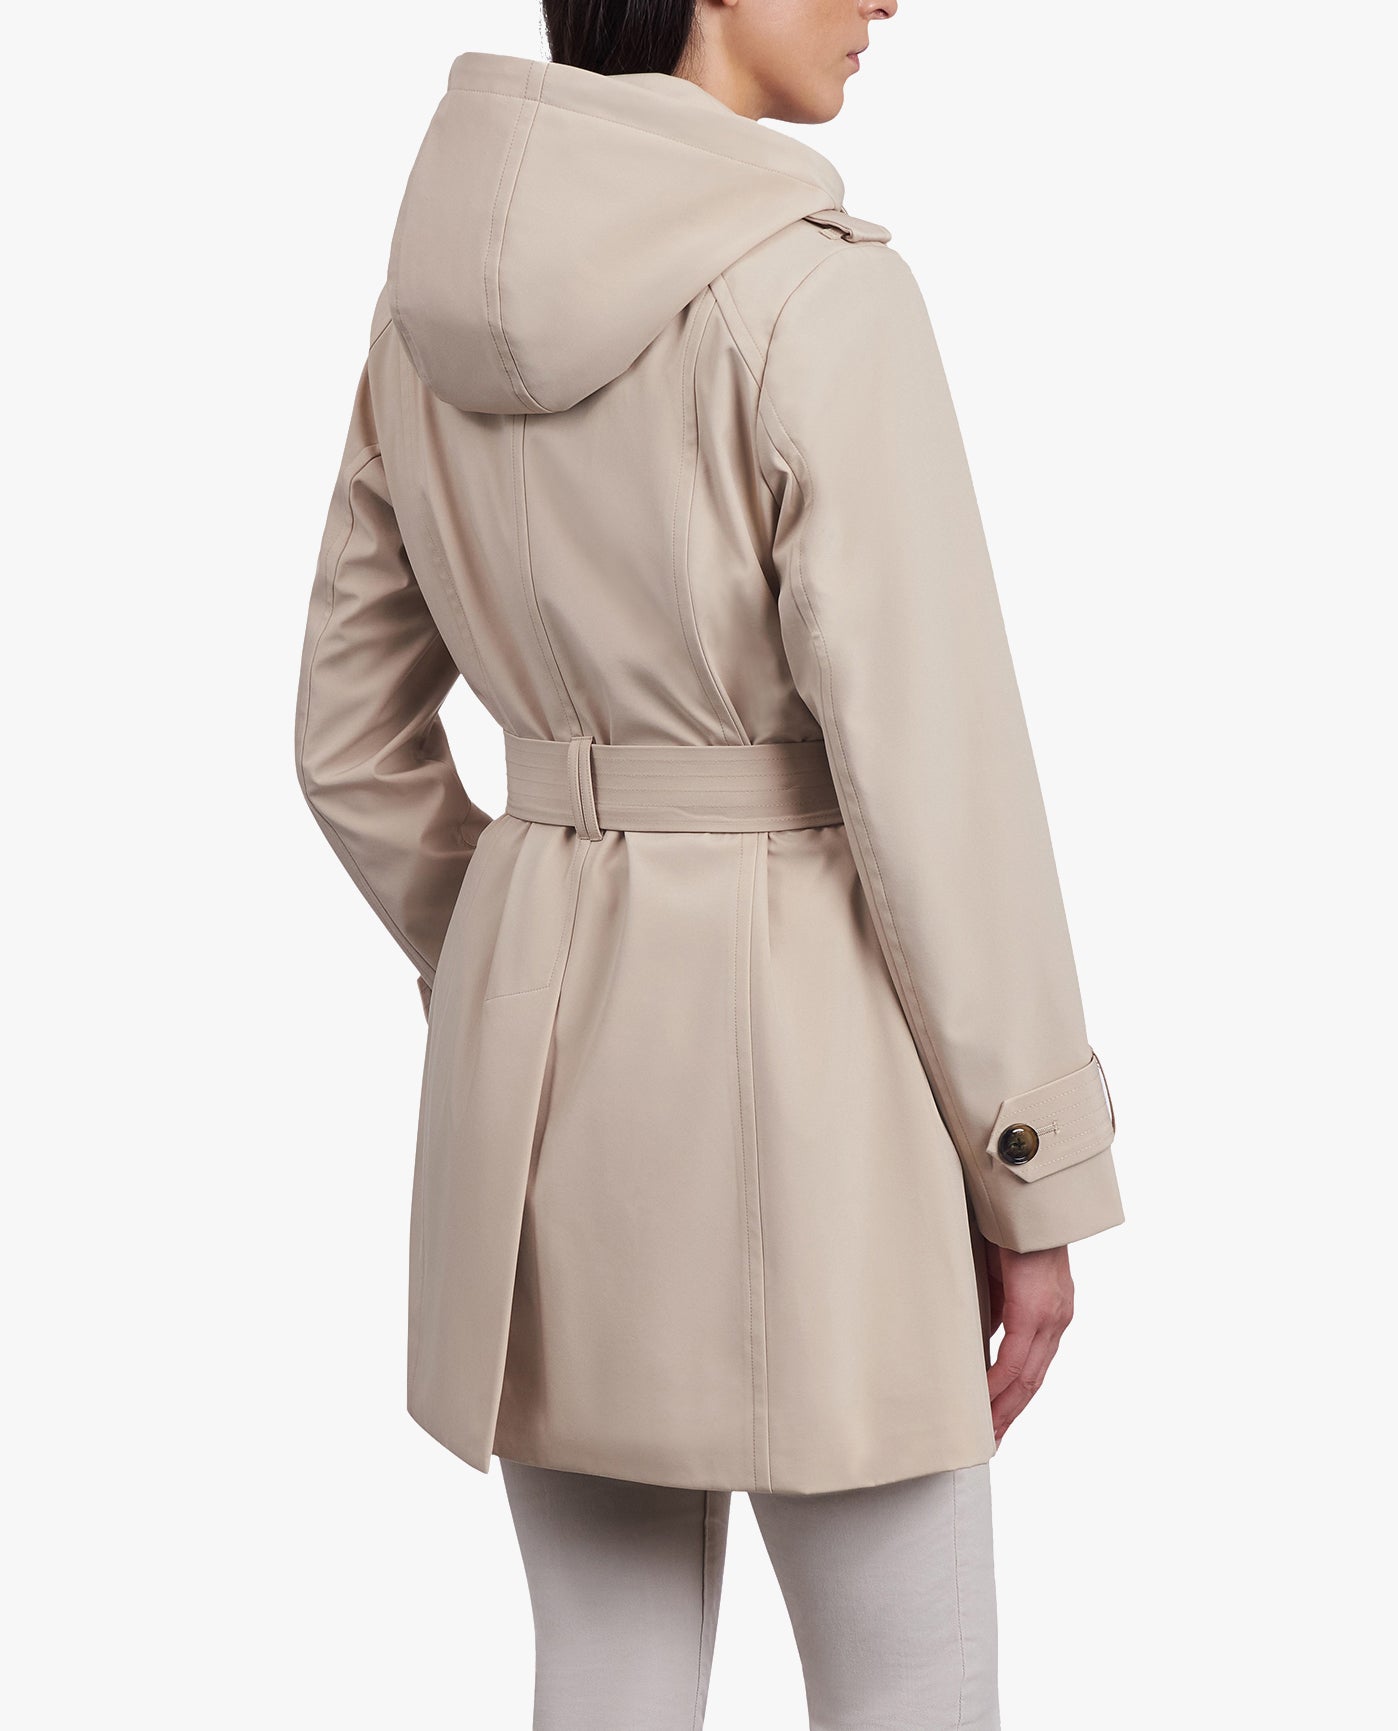 BACK OF SINGLE BREASTED HOODED TRENCH COAT WITH WAIST BELT | STONE